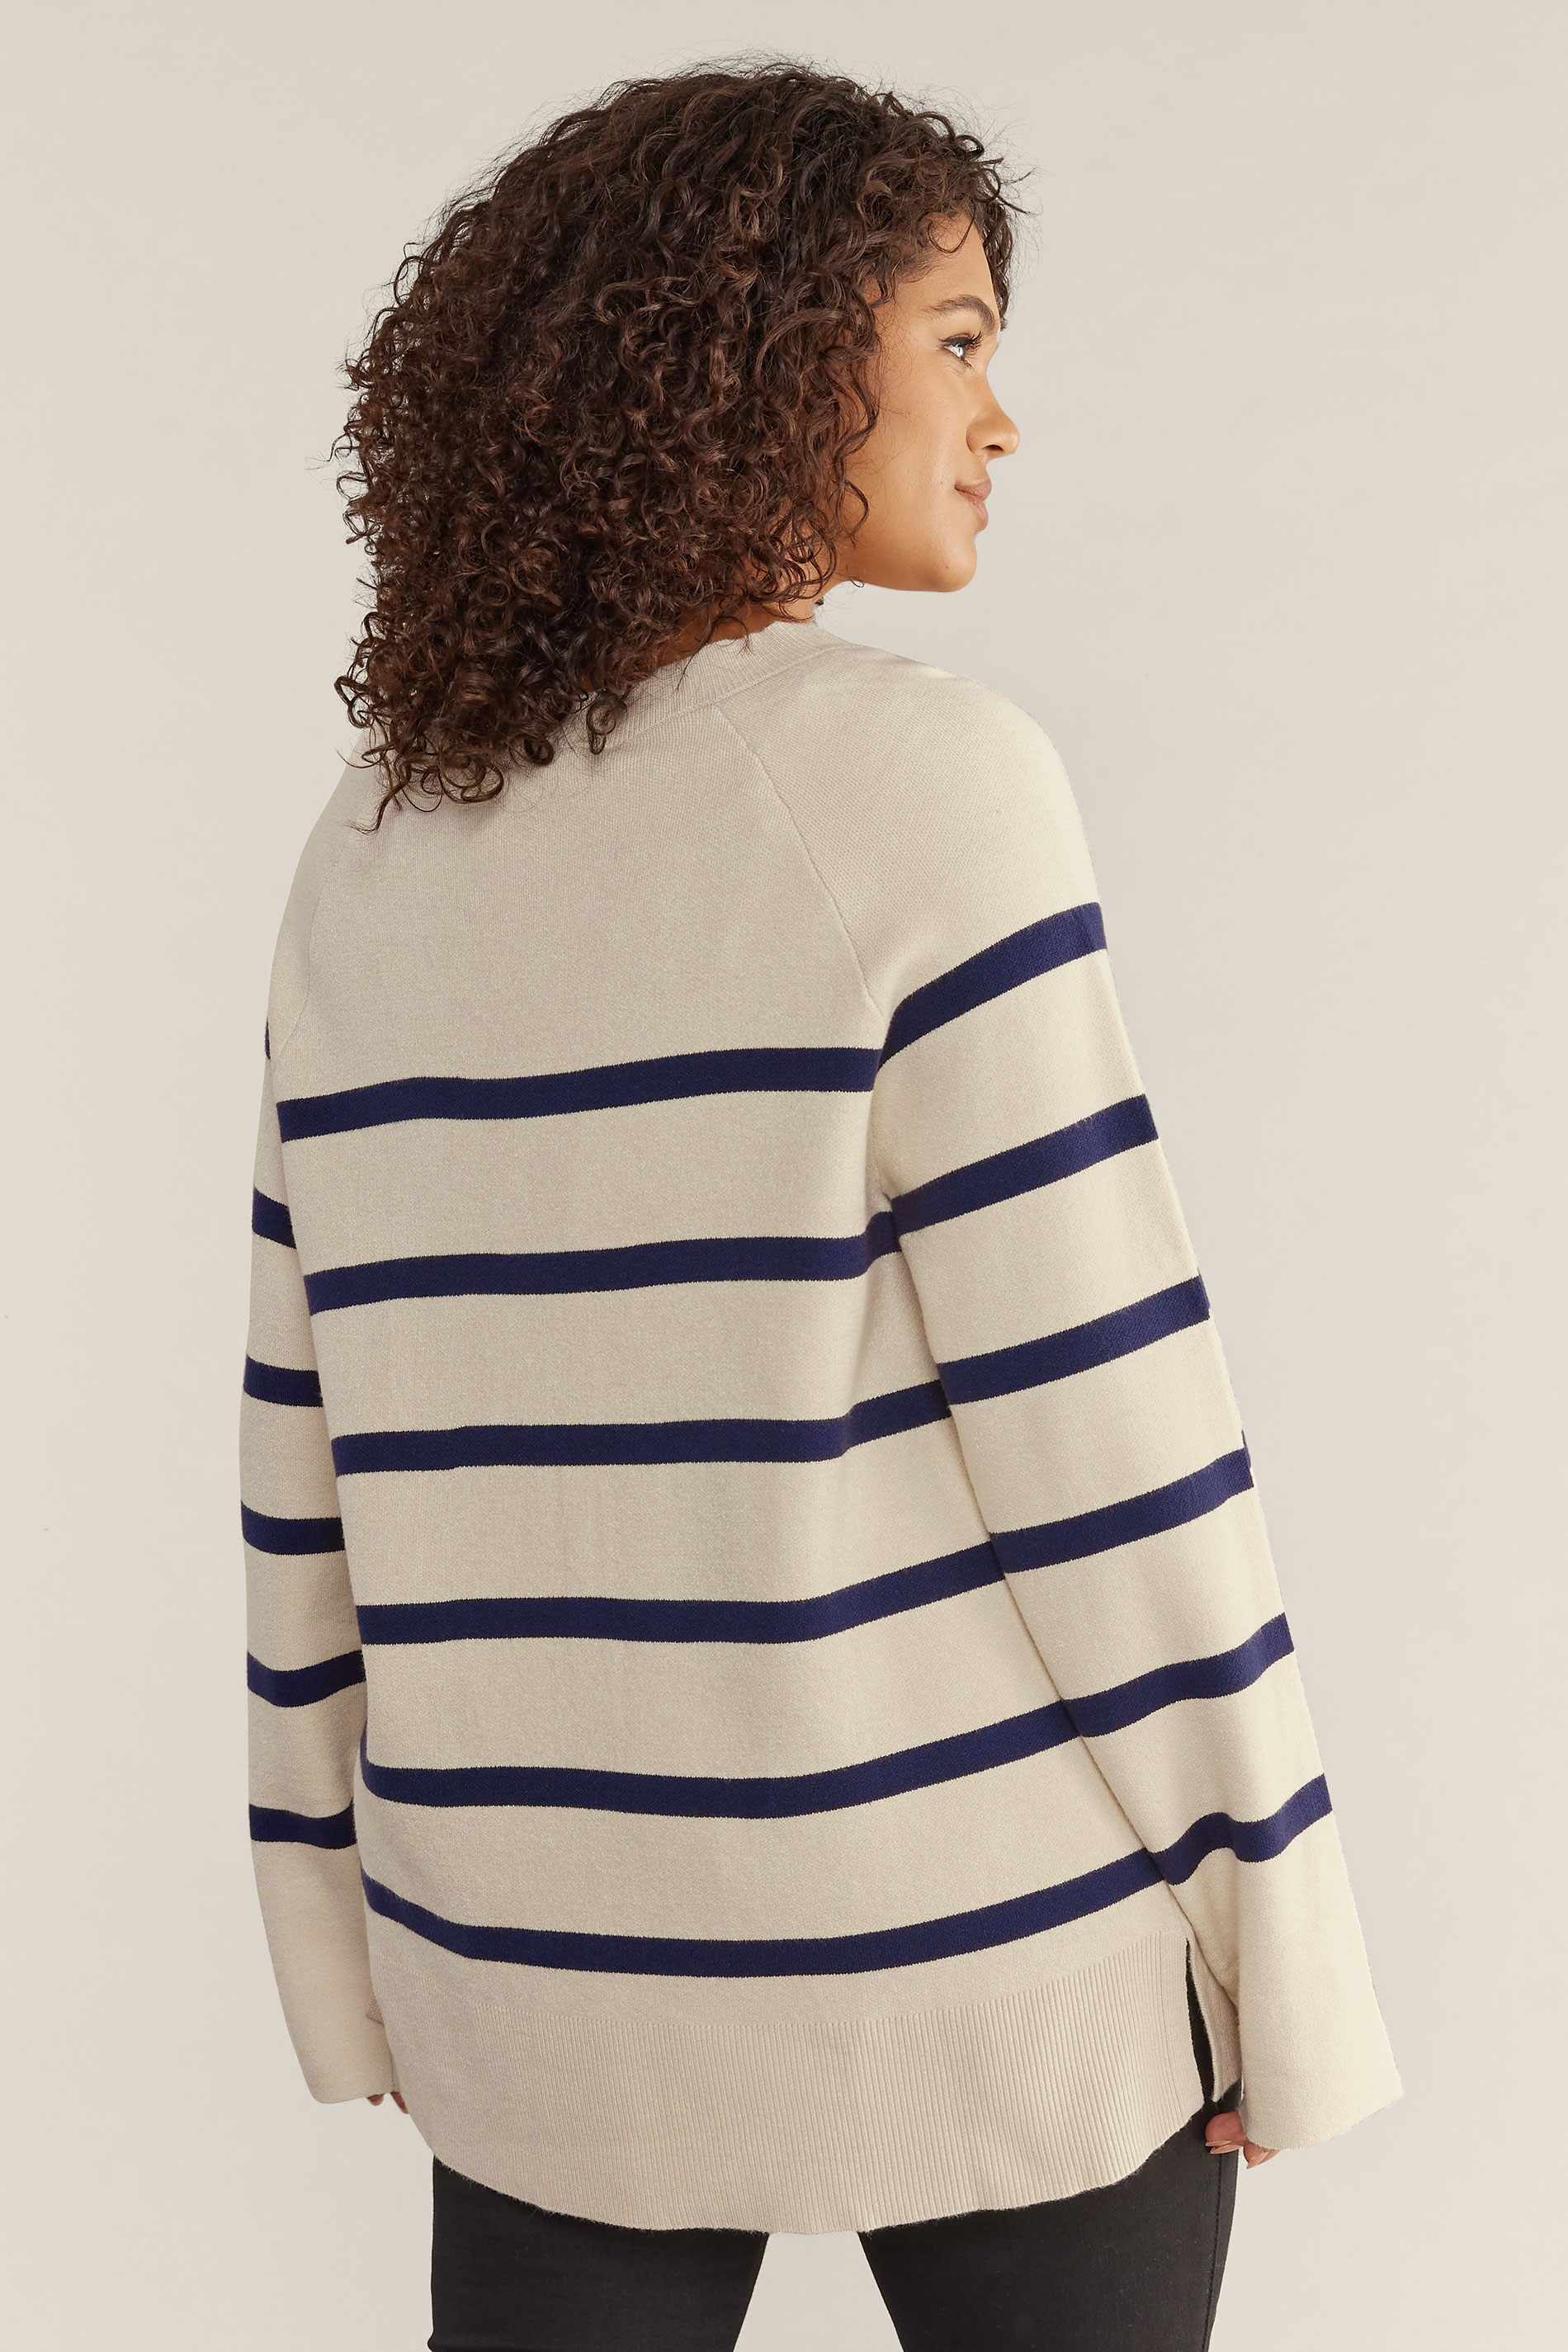 EVANS Plus Size Ivory White & Blue Striped Knitted Jumper | Evans 2